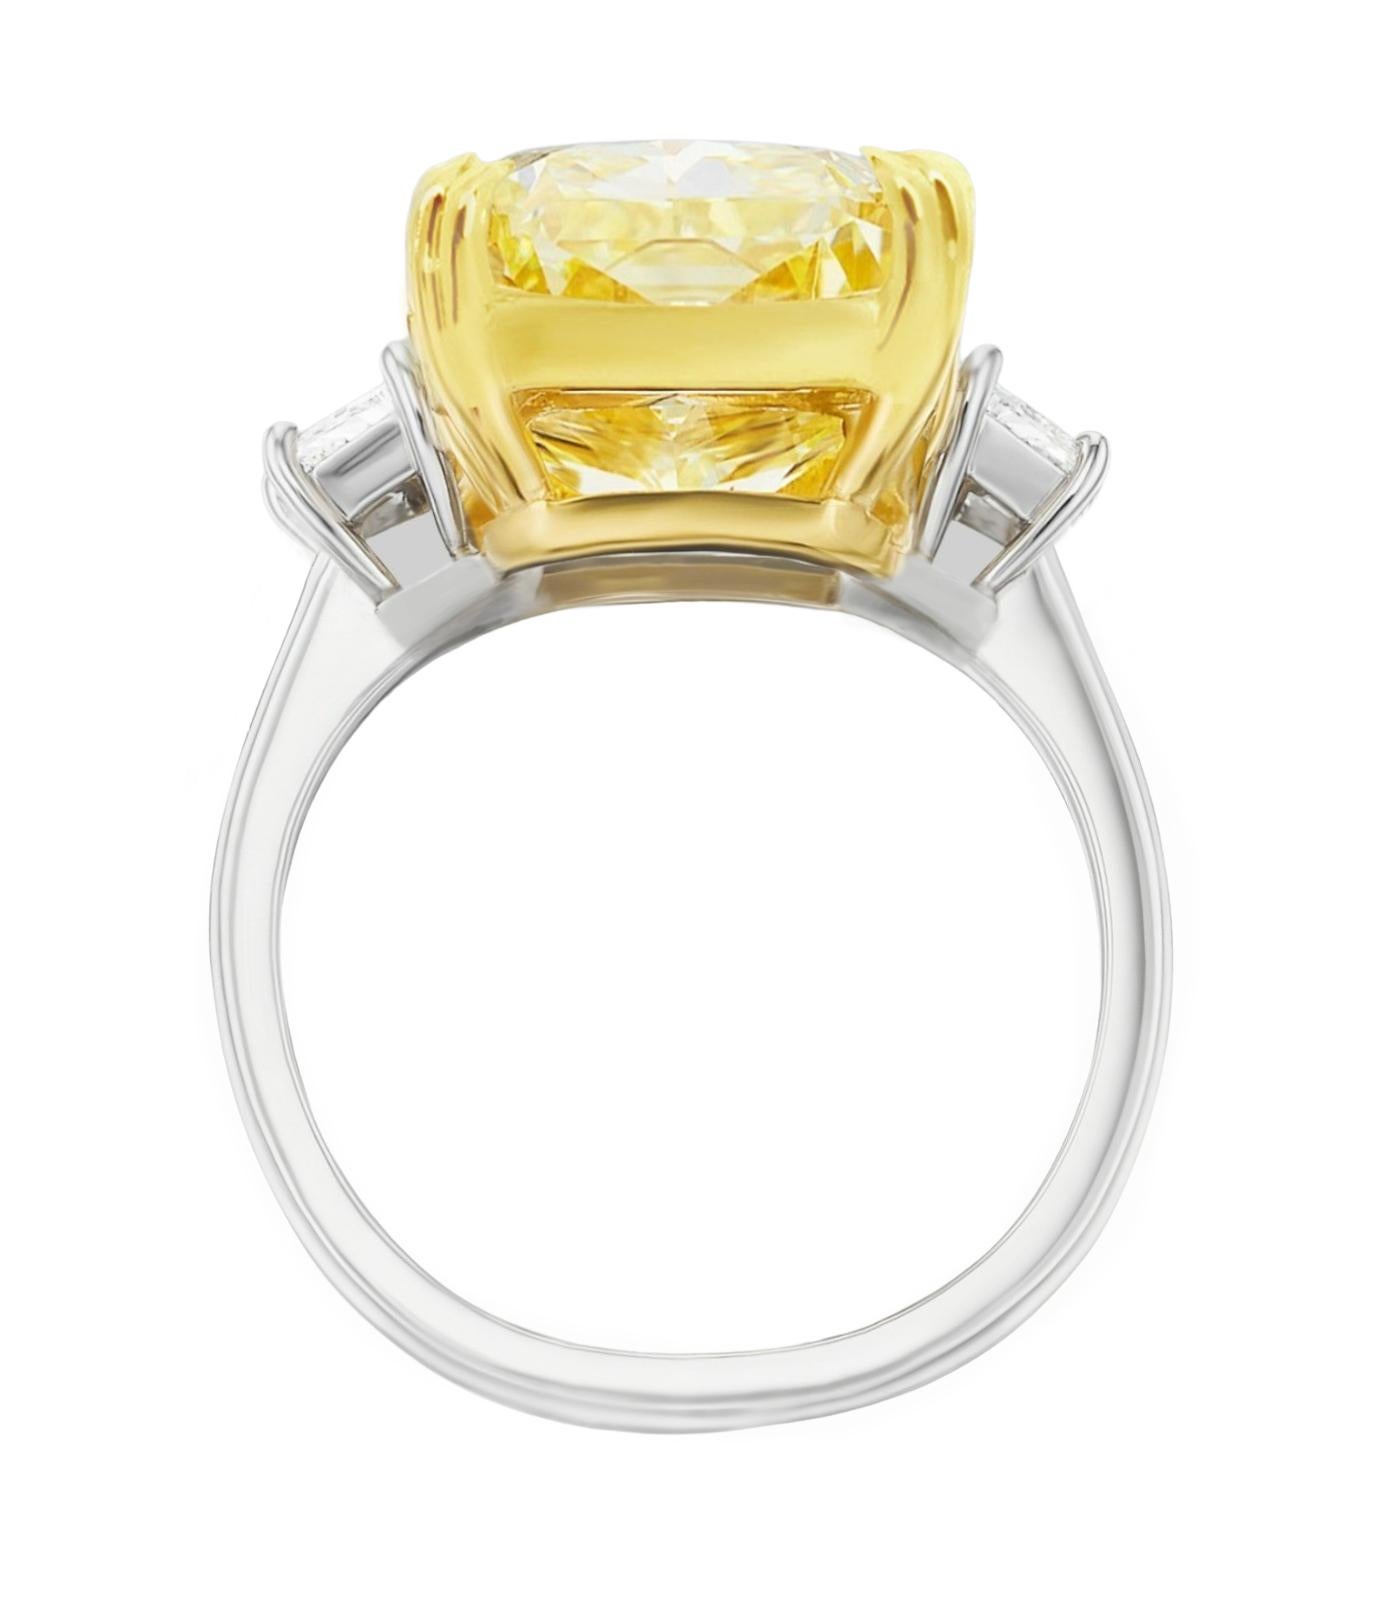 Modern GIA Certified 5 Carat Fancy Yellow Clarity Radiant Diamond Ring For Sale